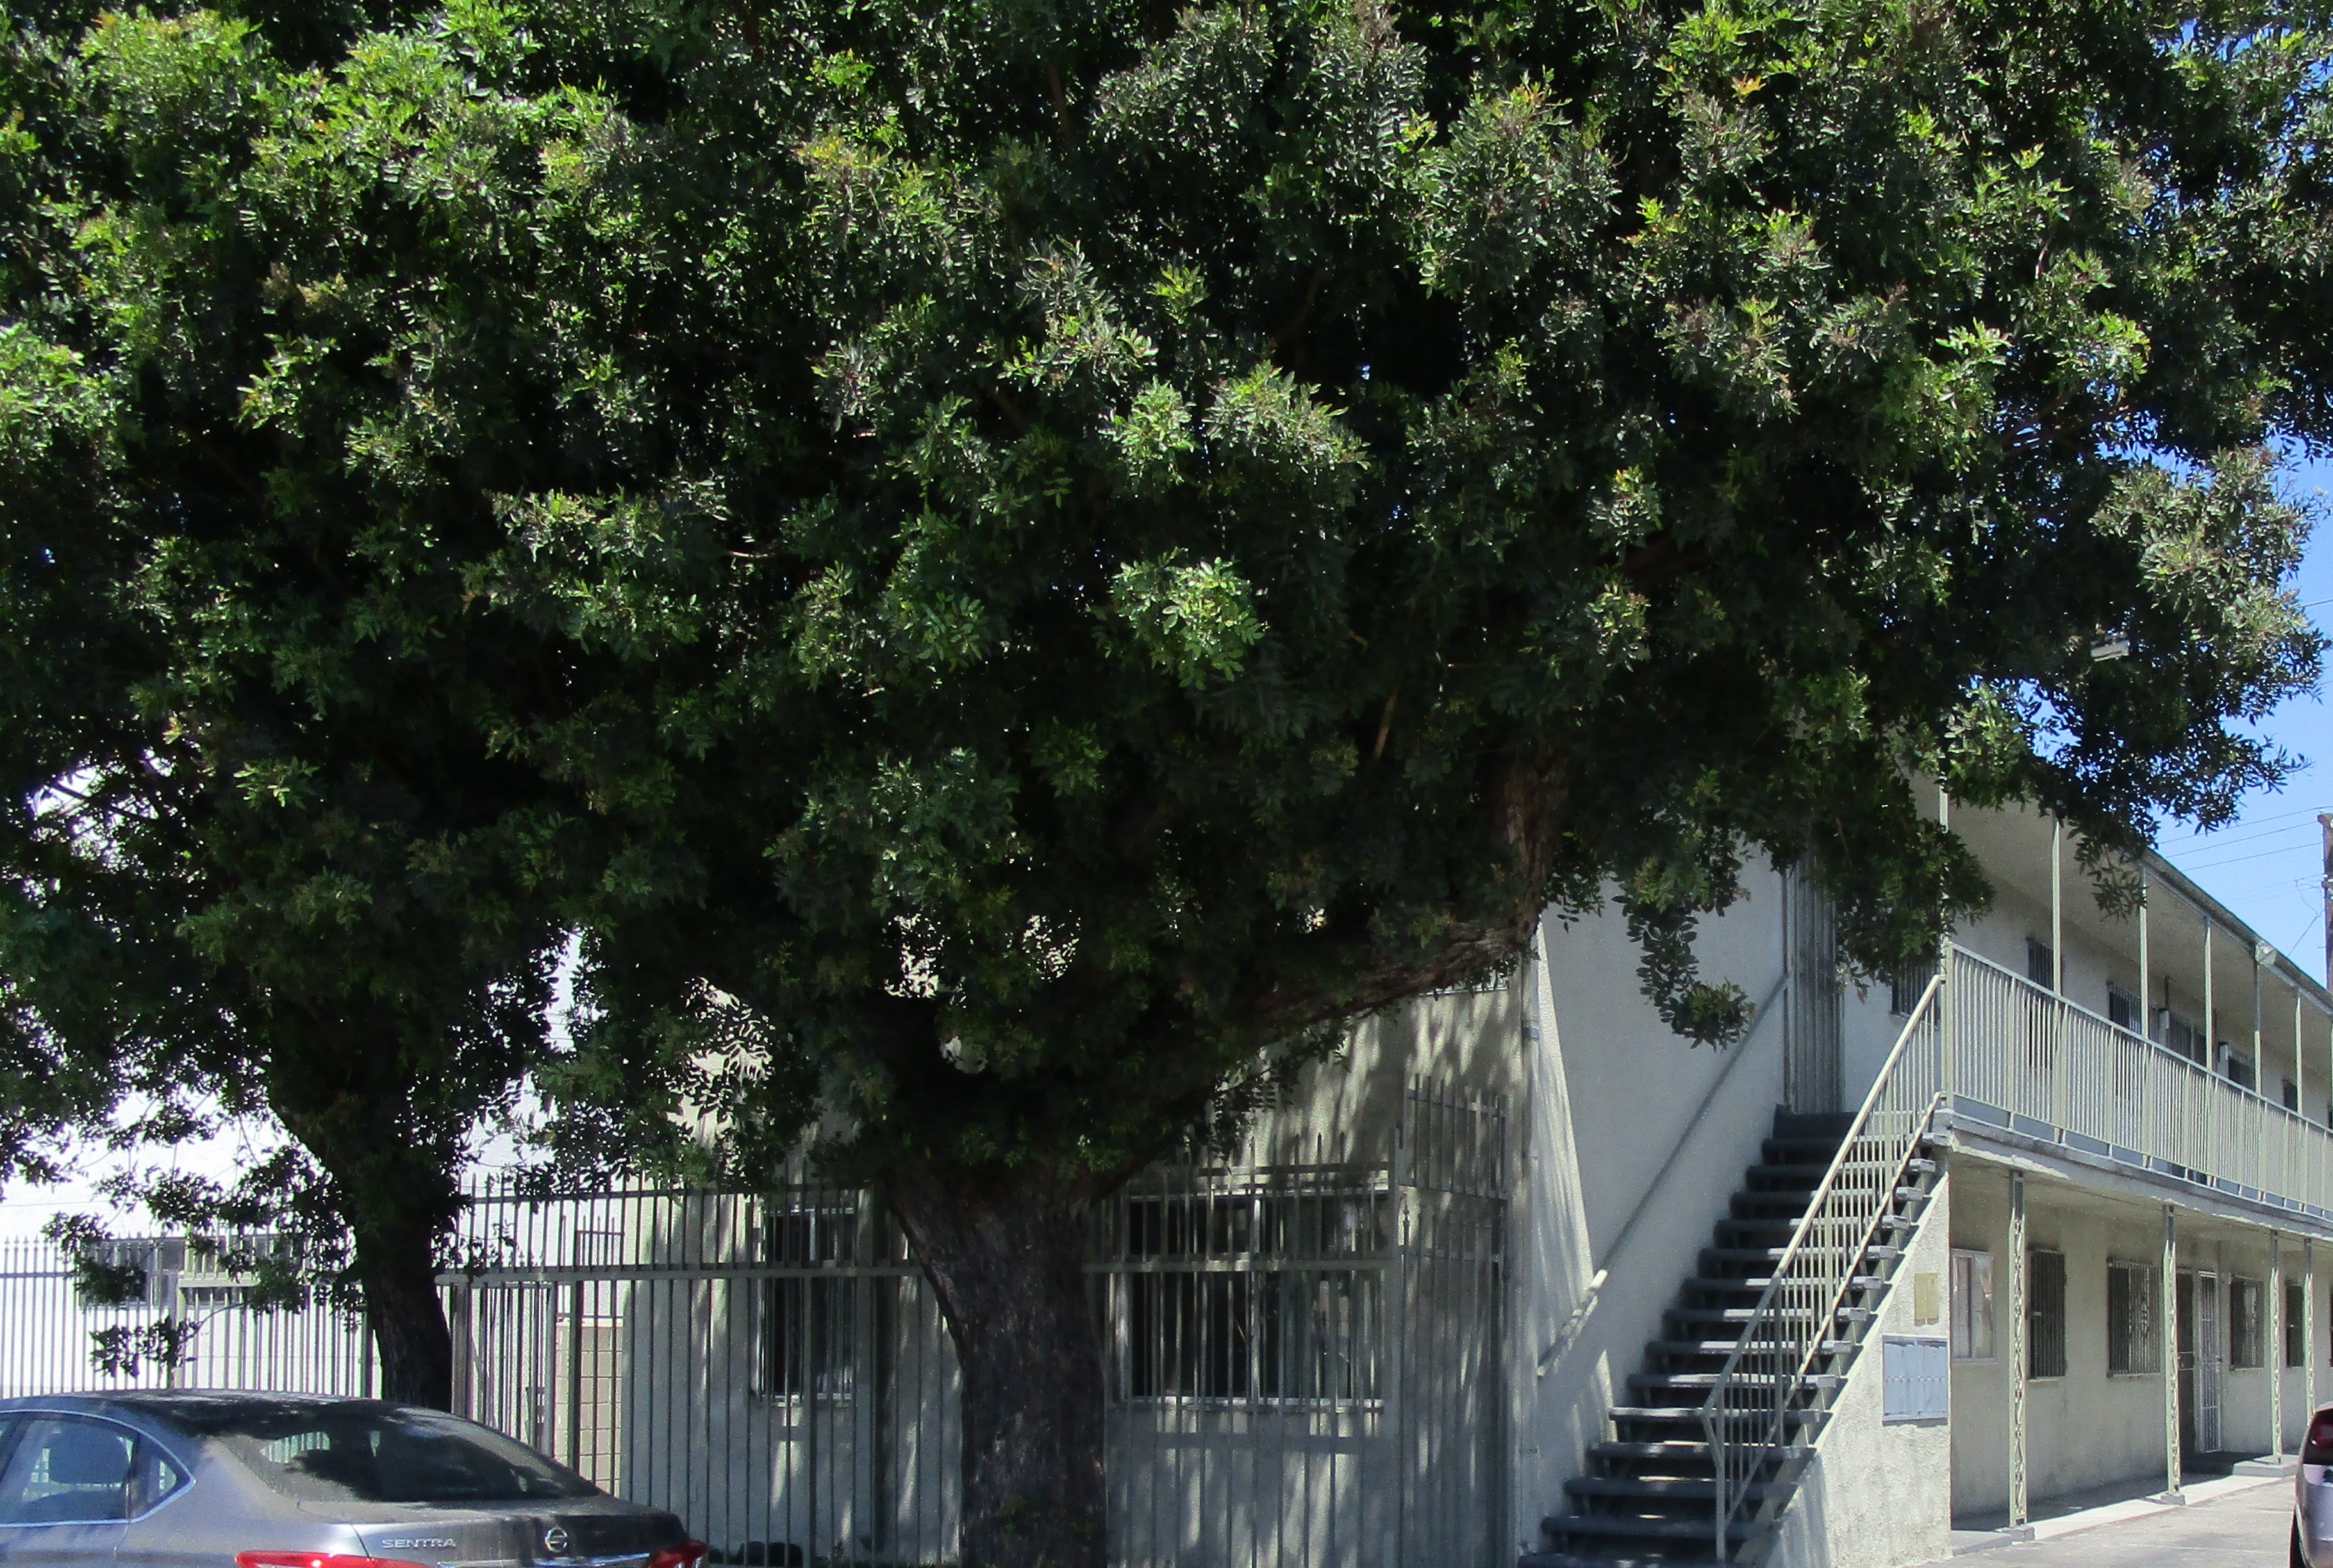 Street view of the property with a large tree obstructing the view of the building